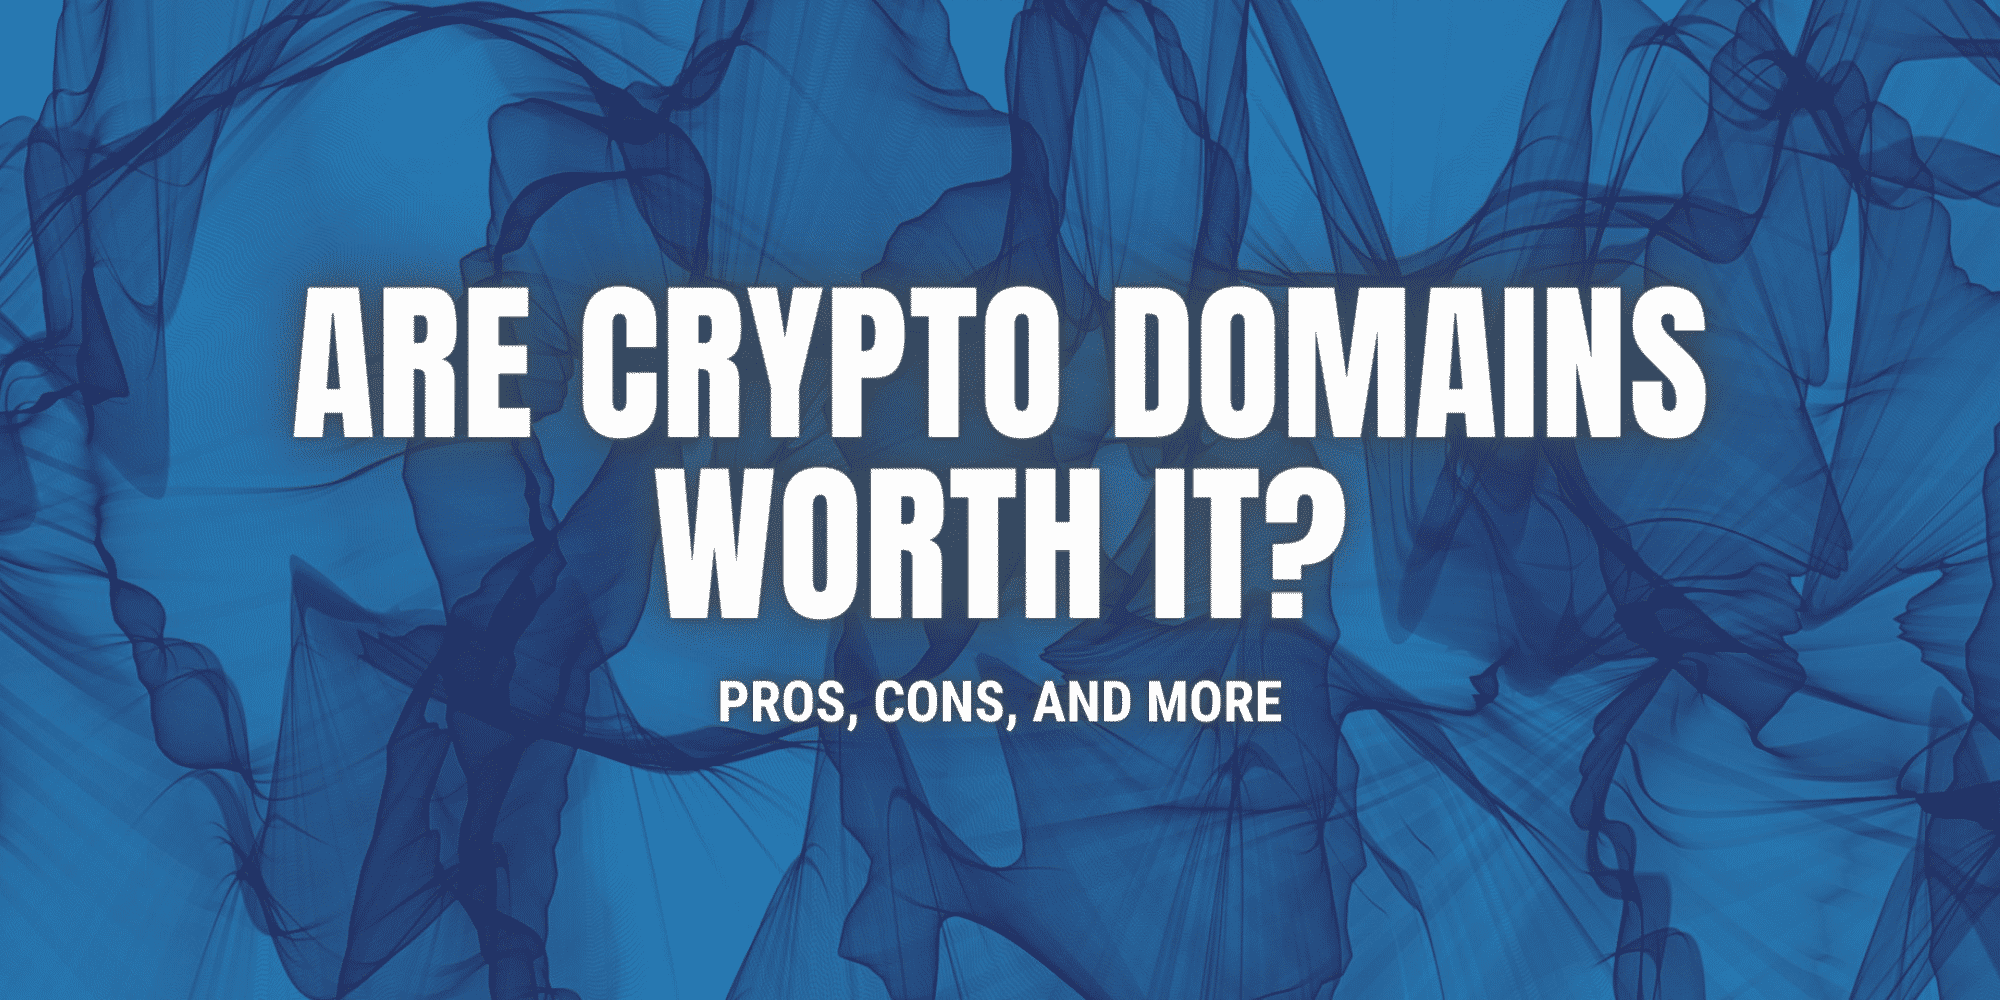 Are Crypto Domains Worth It? Pros, Cons, and What You Should Know